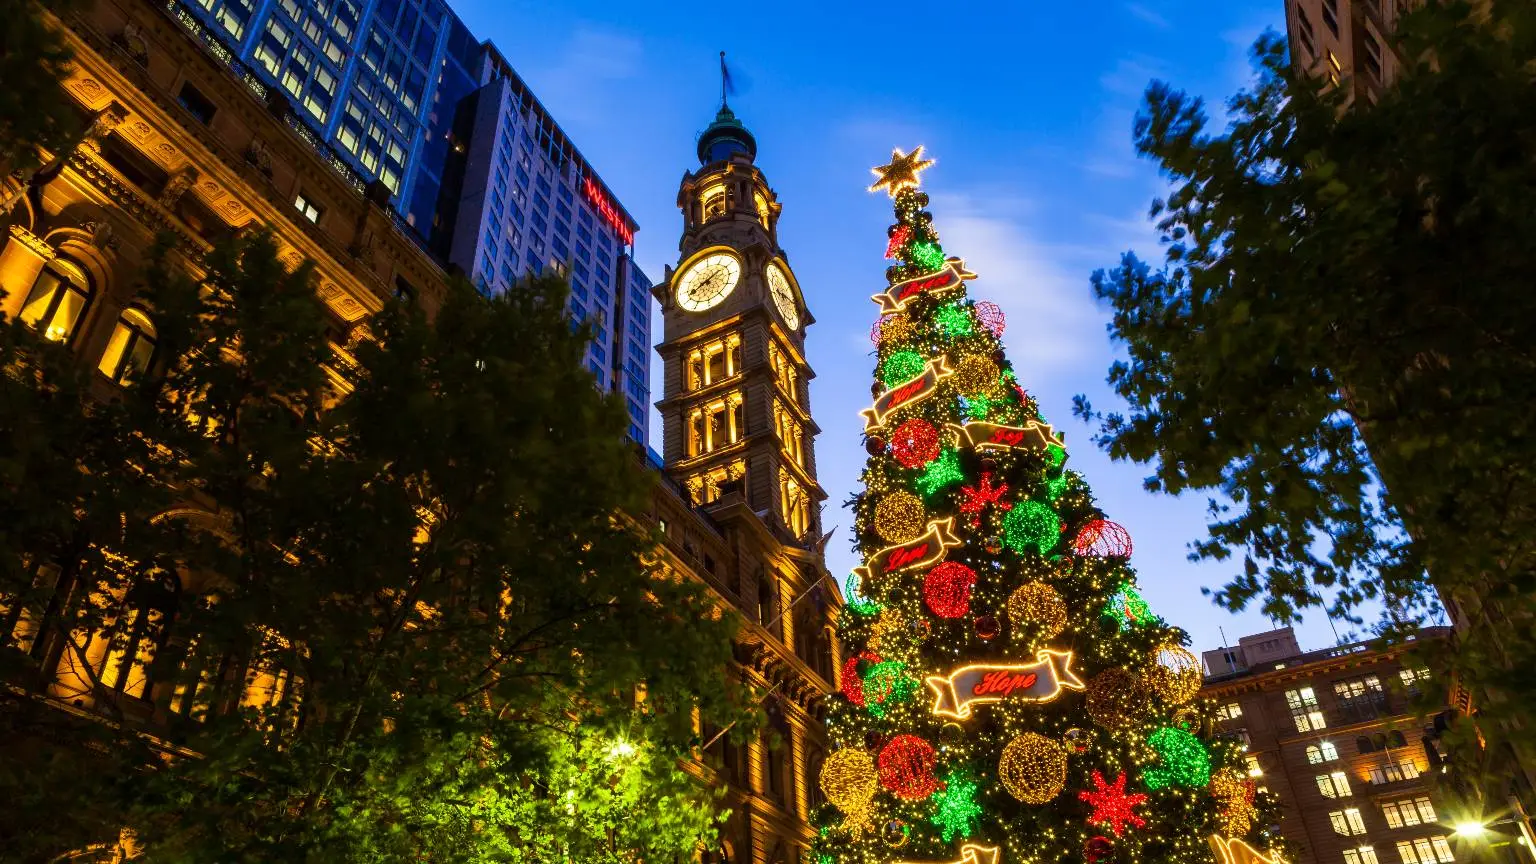 Christmas tree & clock tower in Martin Place